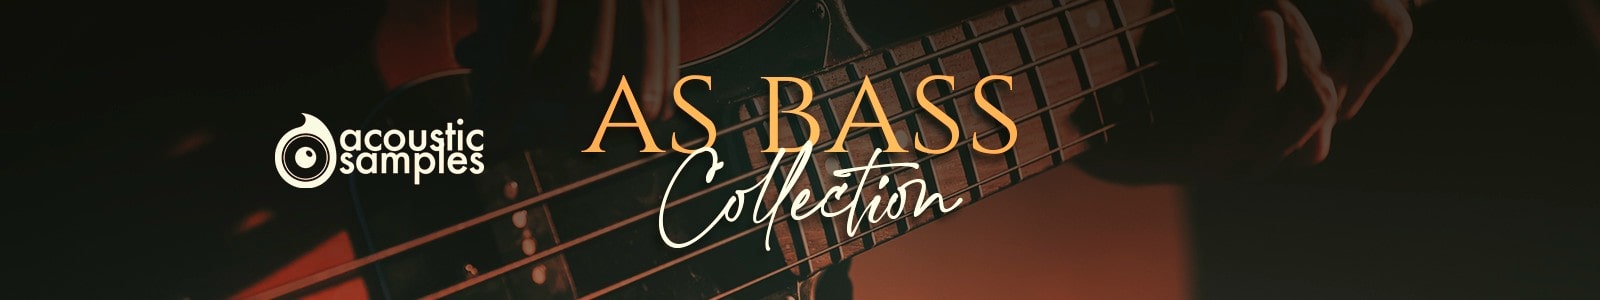 acousticsamples bass collection